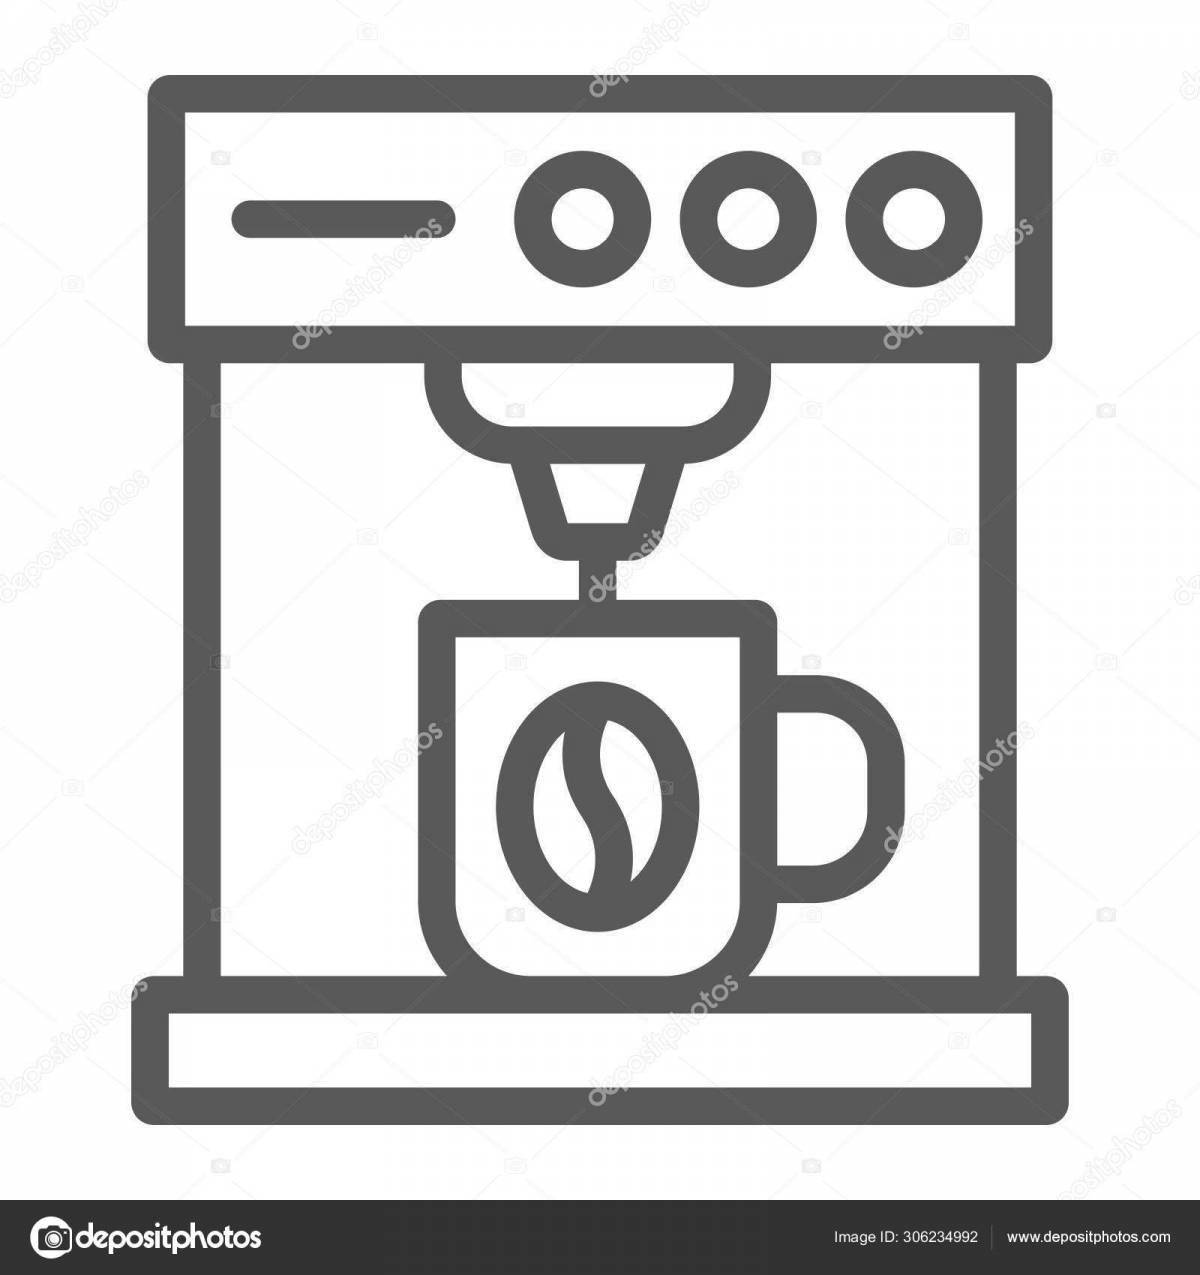 Coffee maker coloring page